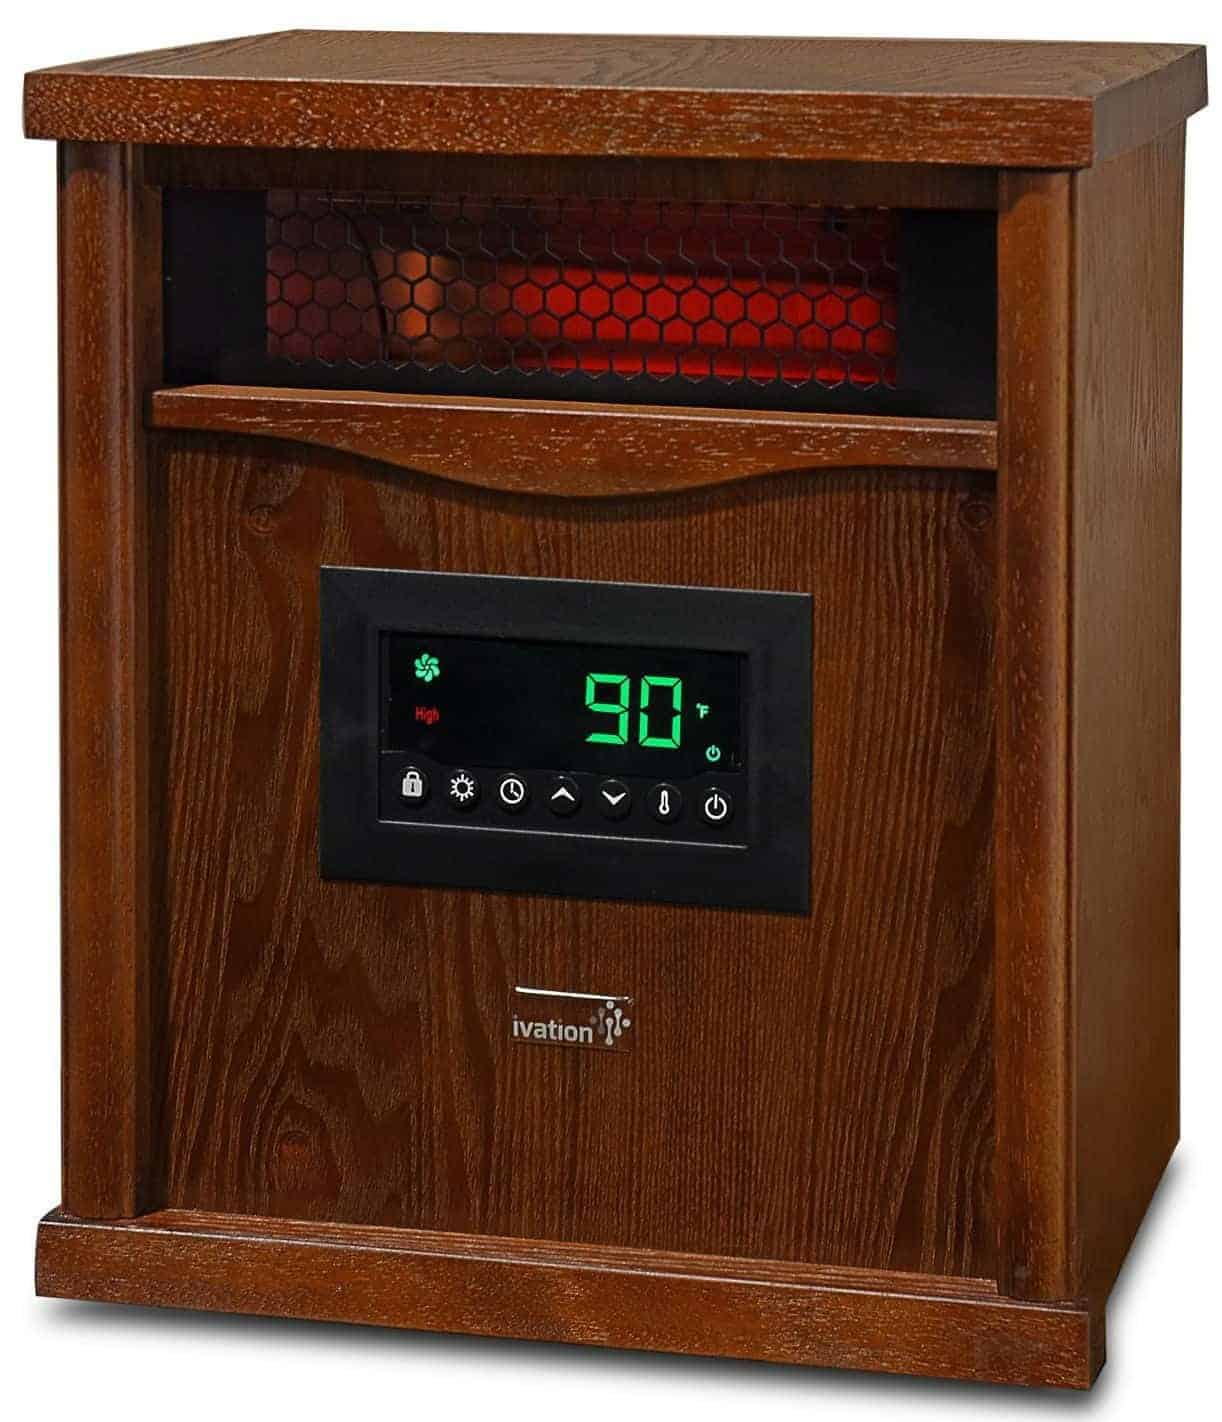 Ivation Portable Electric Space Heater, 1500-Watt 6-Element Infrared Quartz Mini Heater With Digital Thermostat